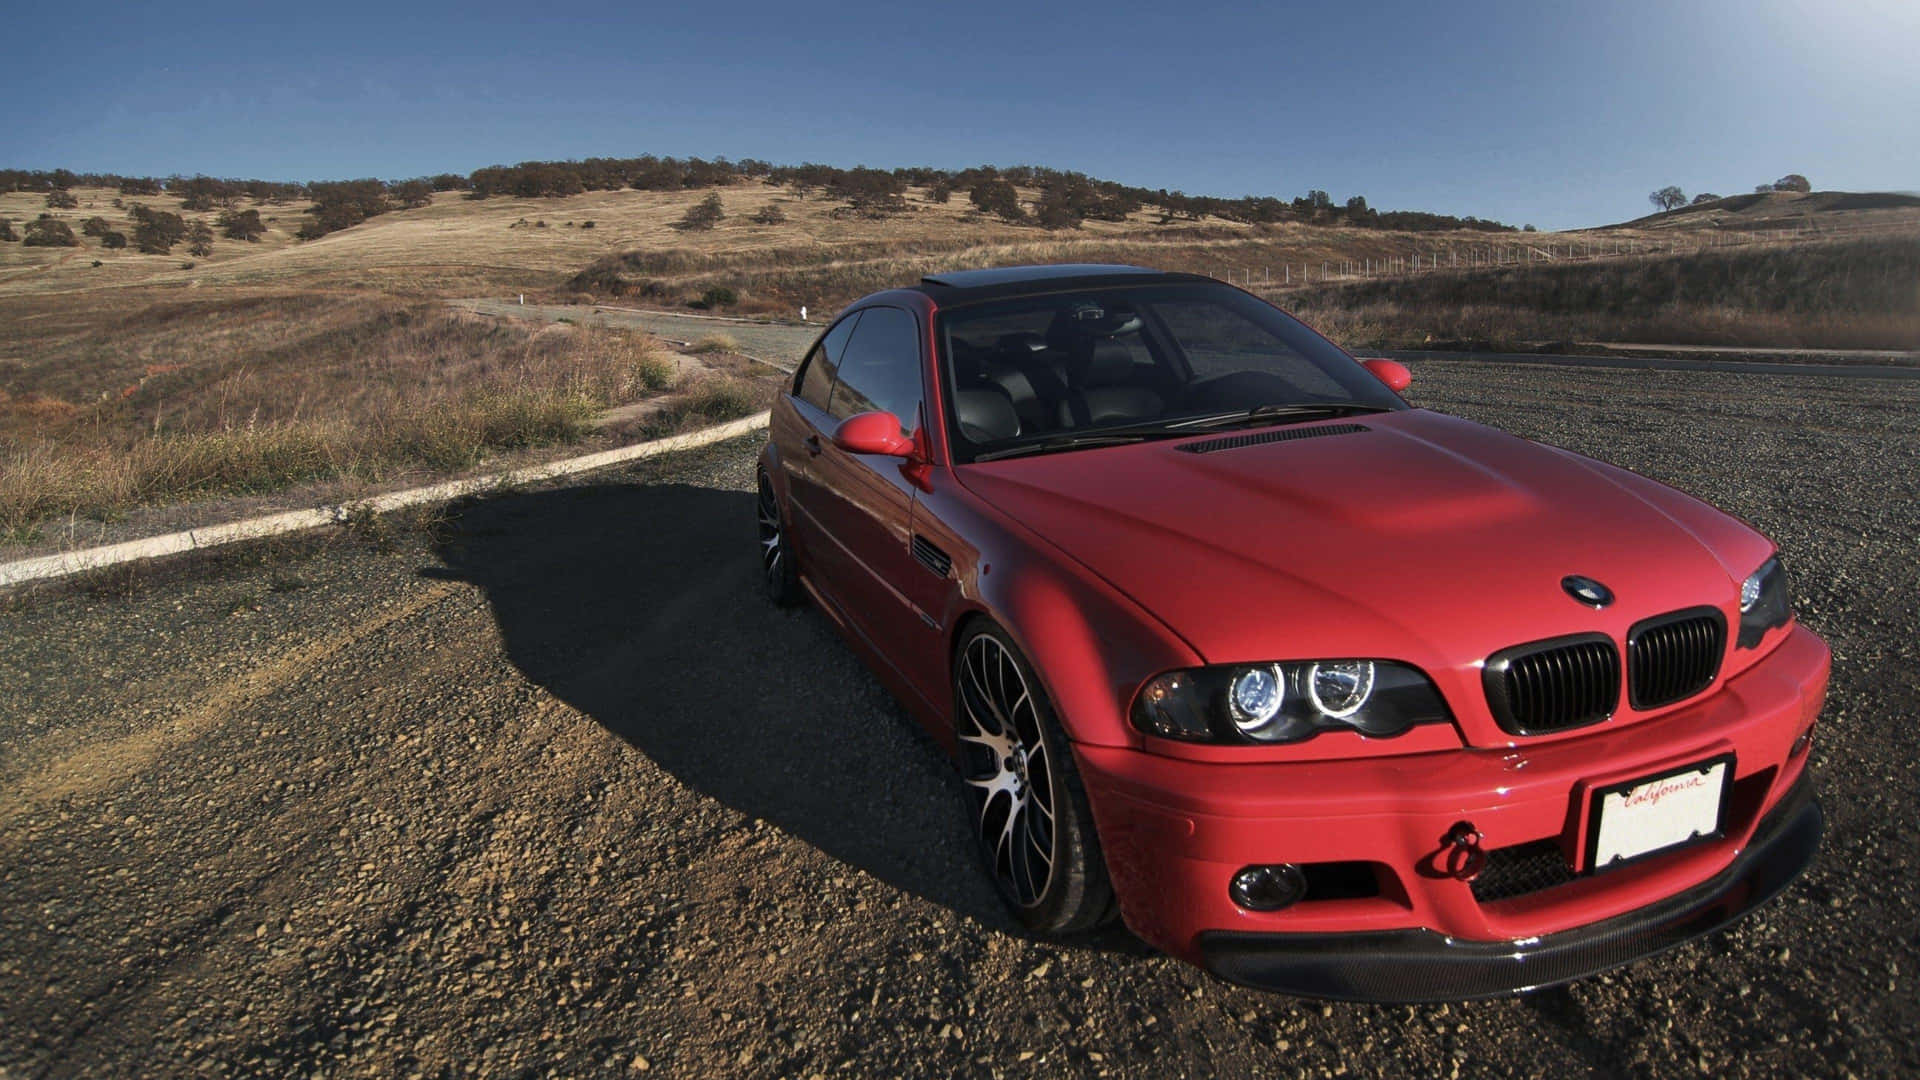 Red B M W E46 Coupe Countryside Wallpaper